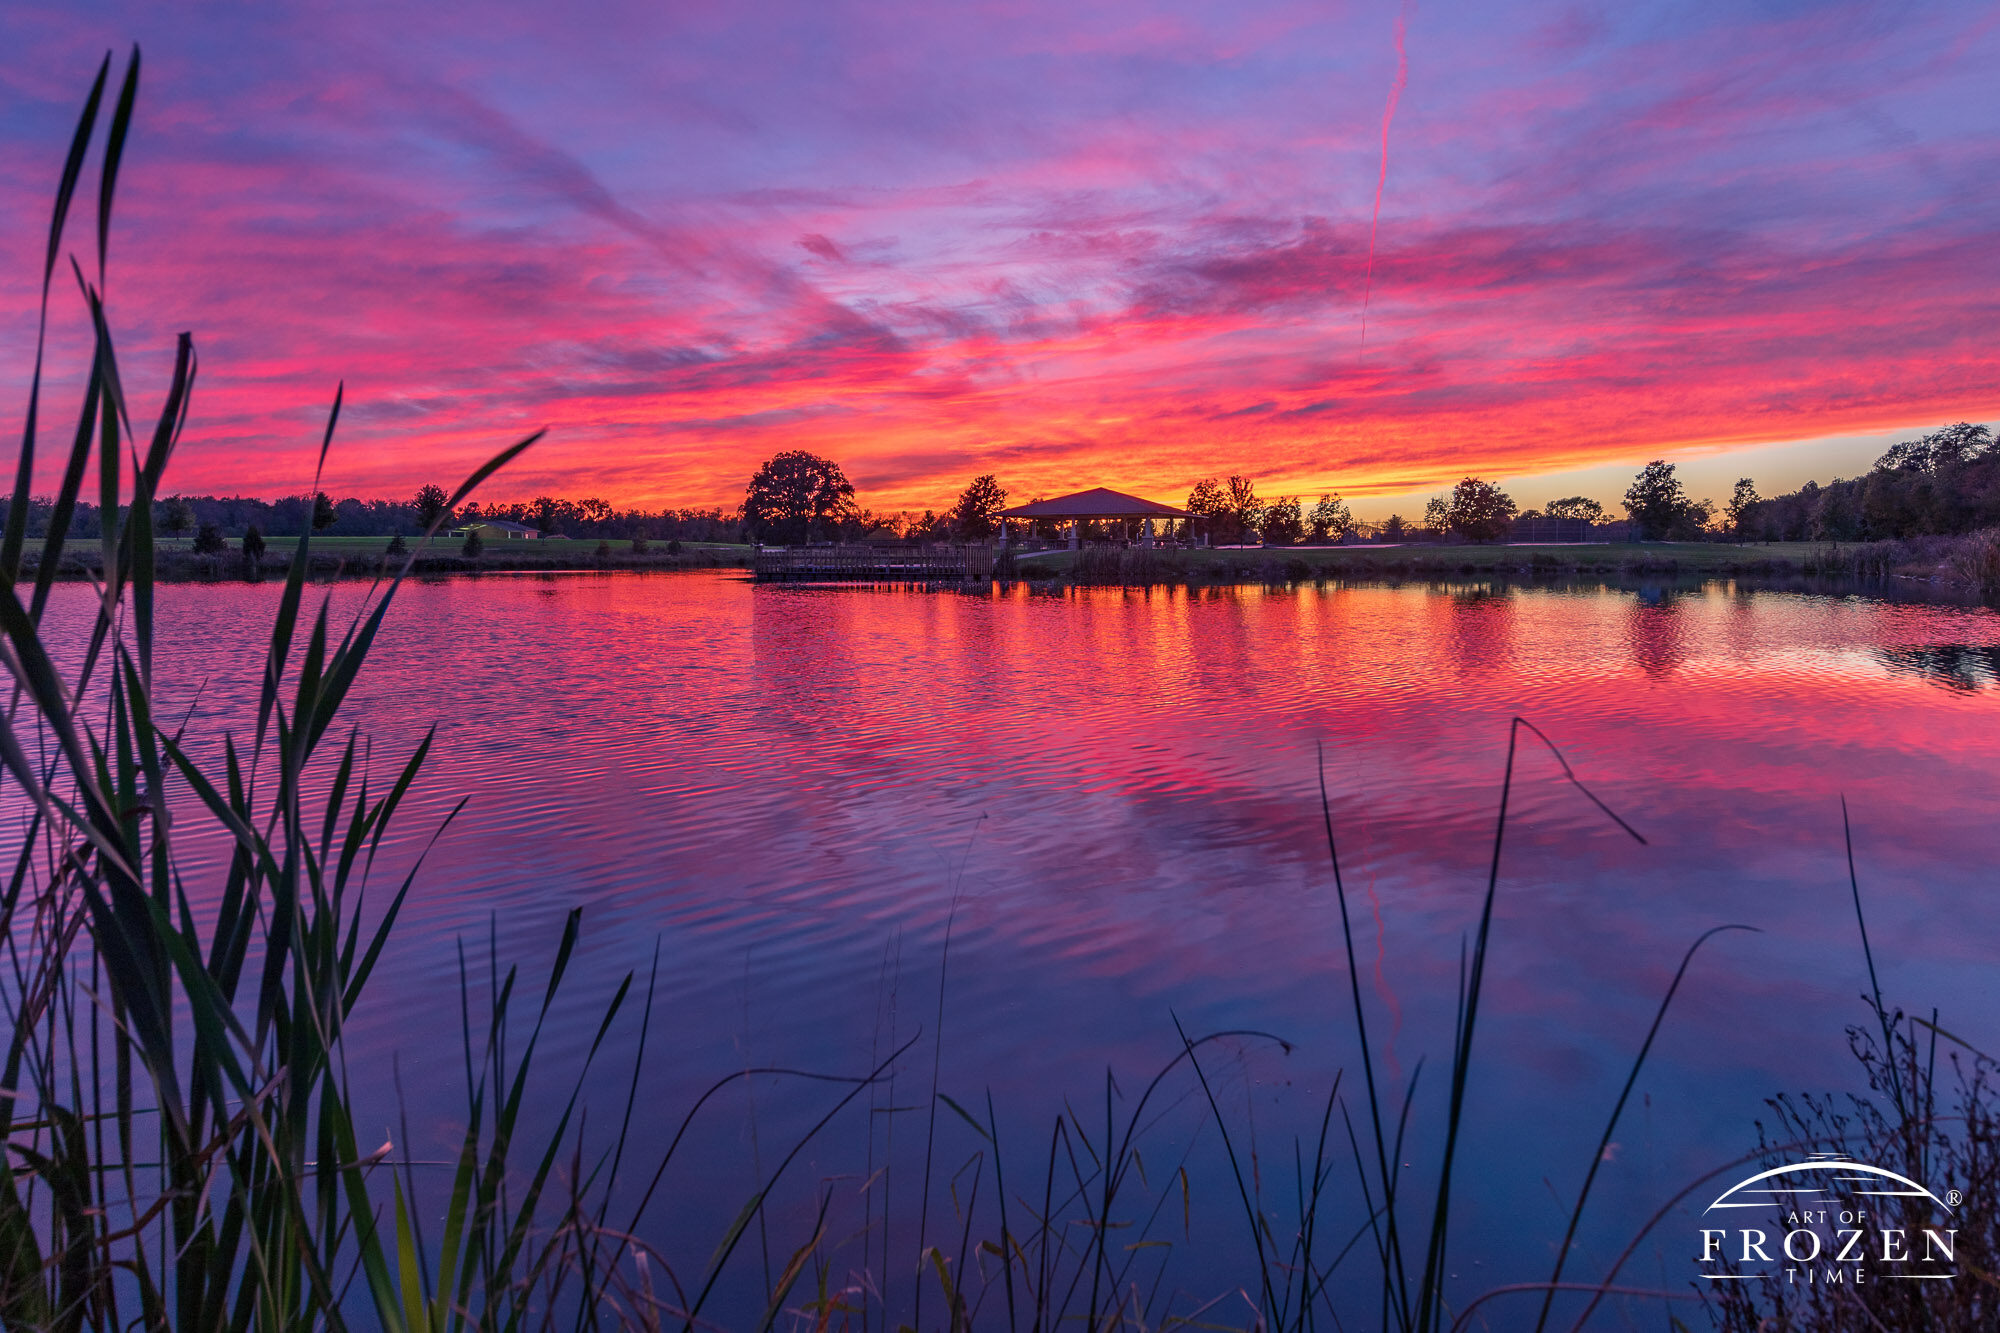 A colorful twilight over Feldman Pond at Centerville Ohio's Oak Grove park. Clouds that previously provided grey skies at sunset, ignitied in vibrant colors at sunset creating a perfect image for Centerville Fine Art Photography